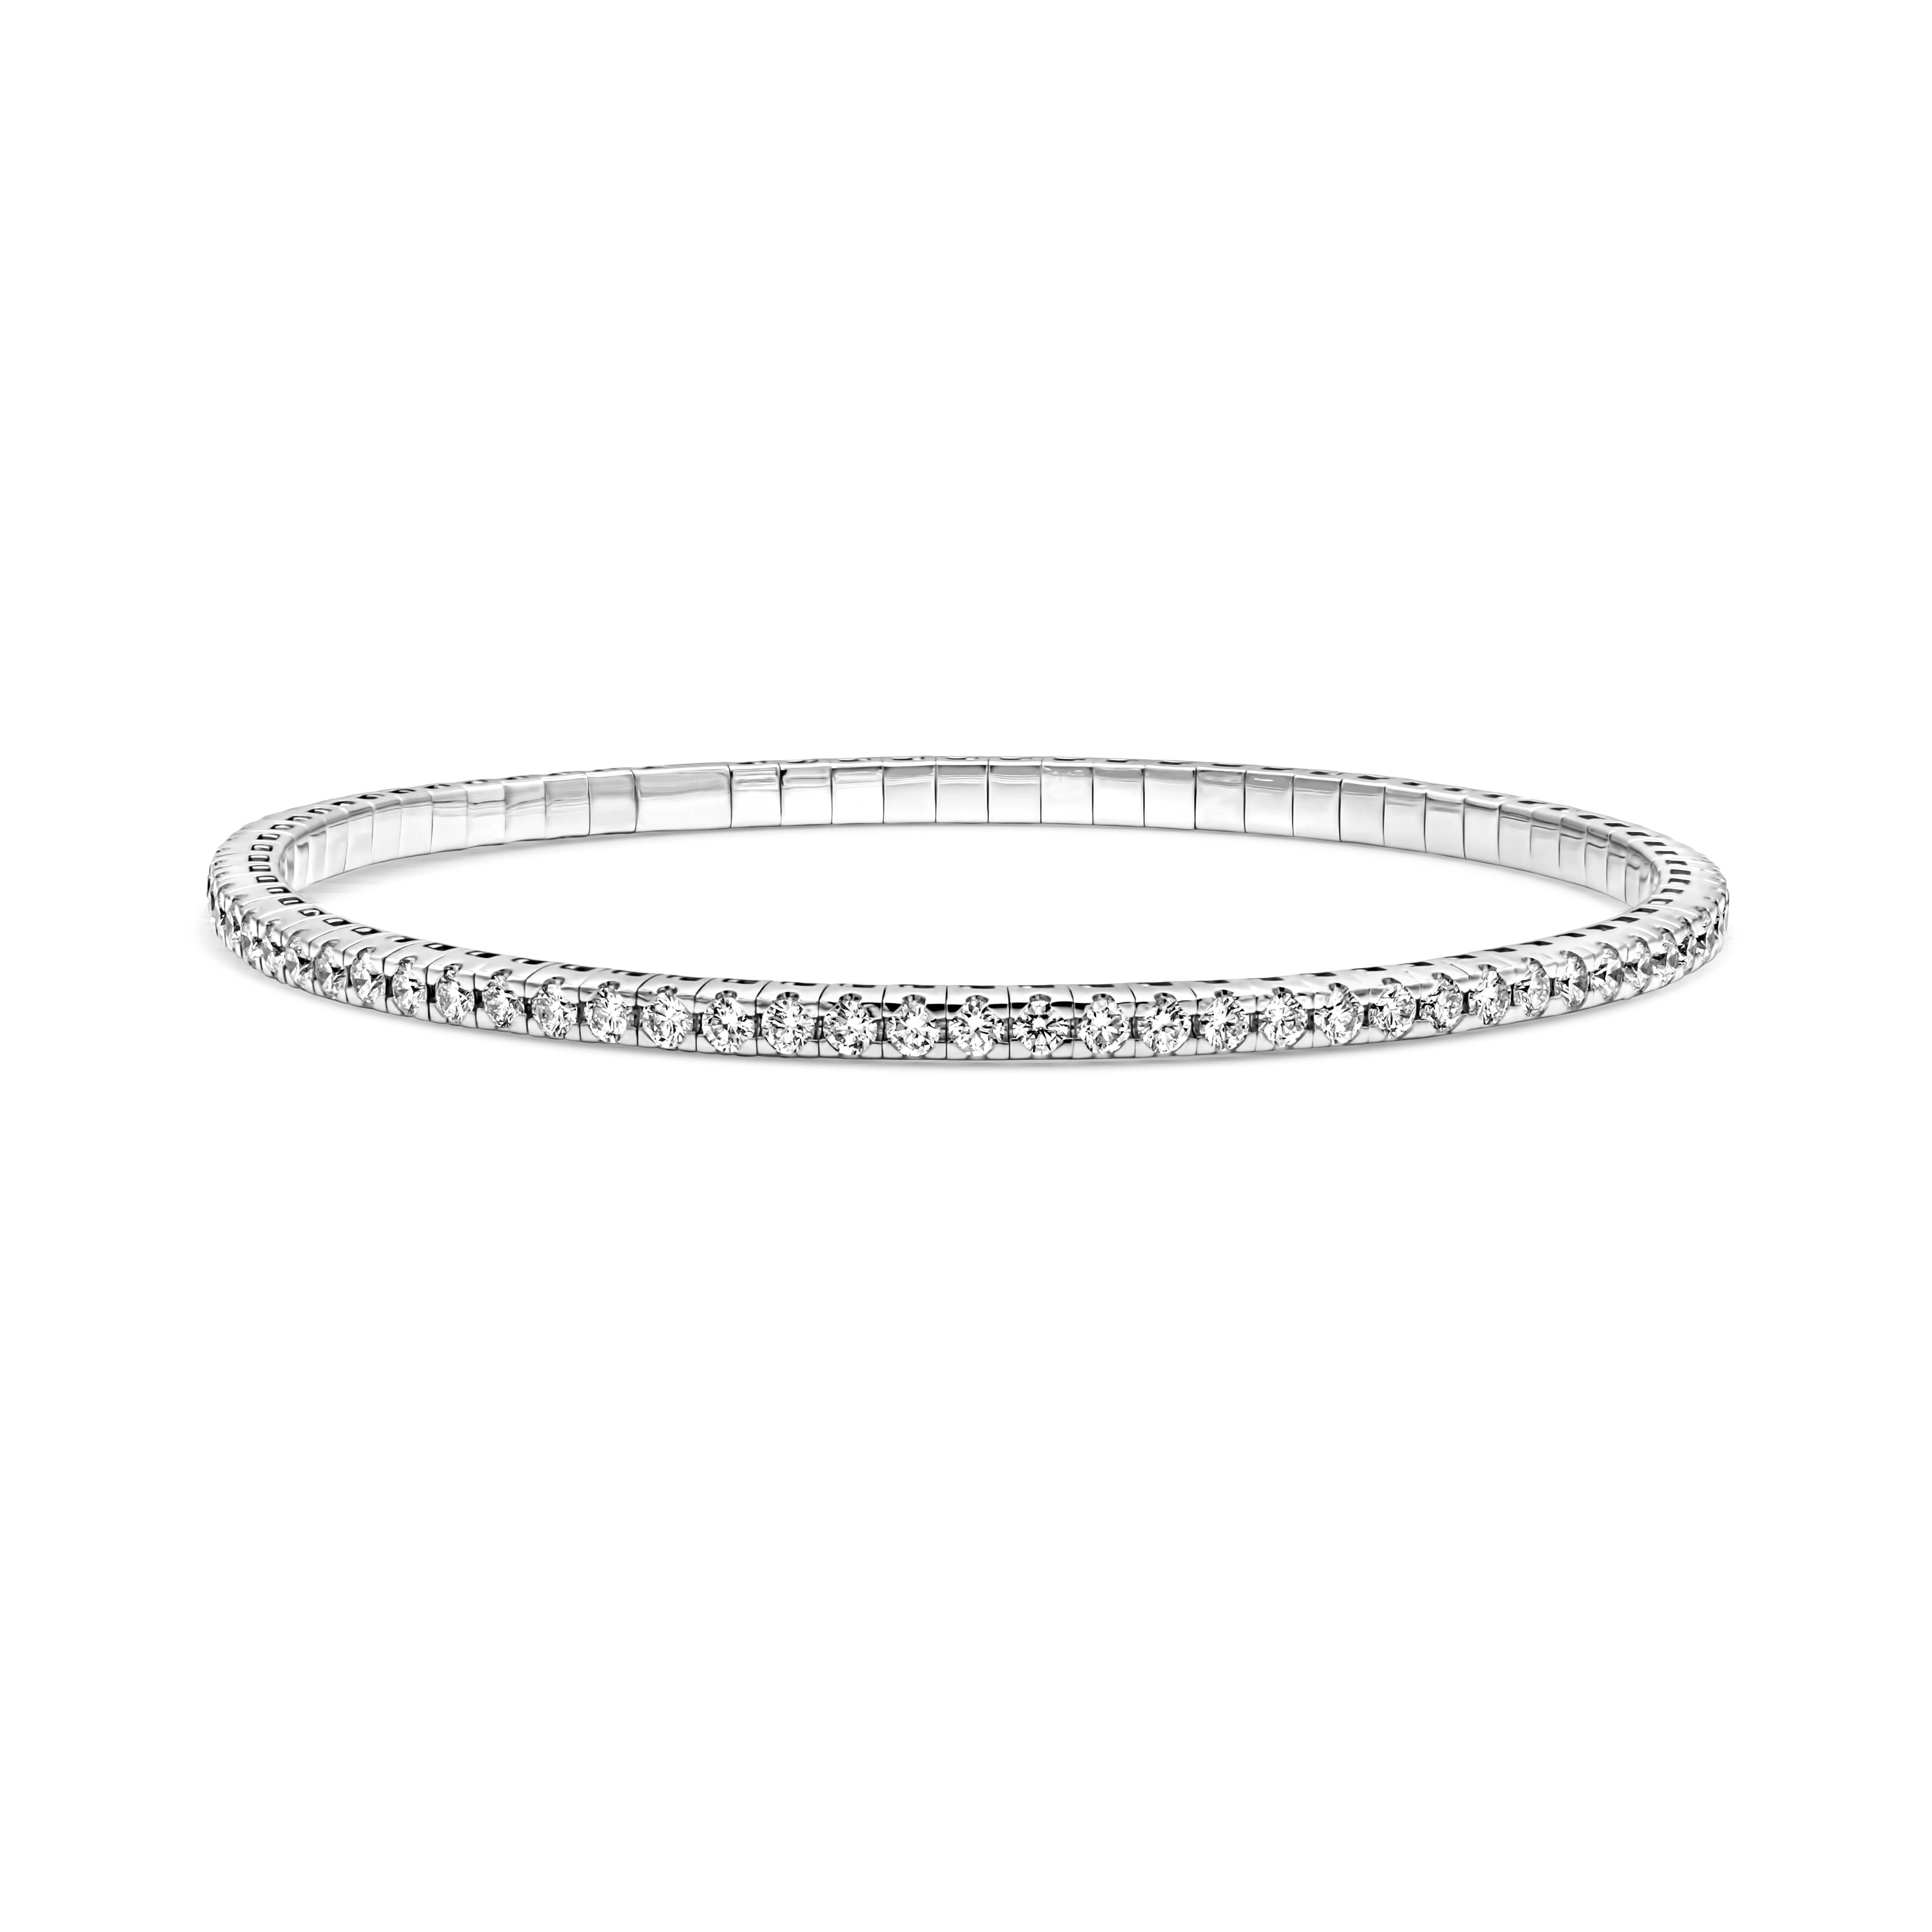 A classic tennis bracelet style showcasing a row of 78 brilliant round diamonds weighing 2.54 carats total, F color and VS2-SI1 n clarity, set in a stretchable 18k white gold mounting. 7inches in length.

Roman Malakov is a custom house,